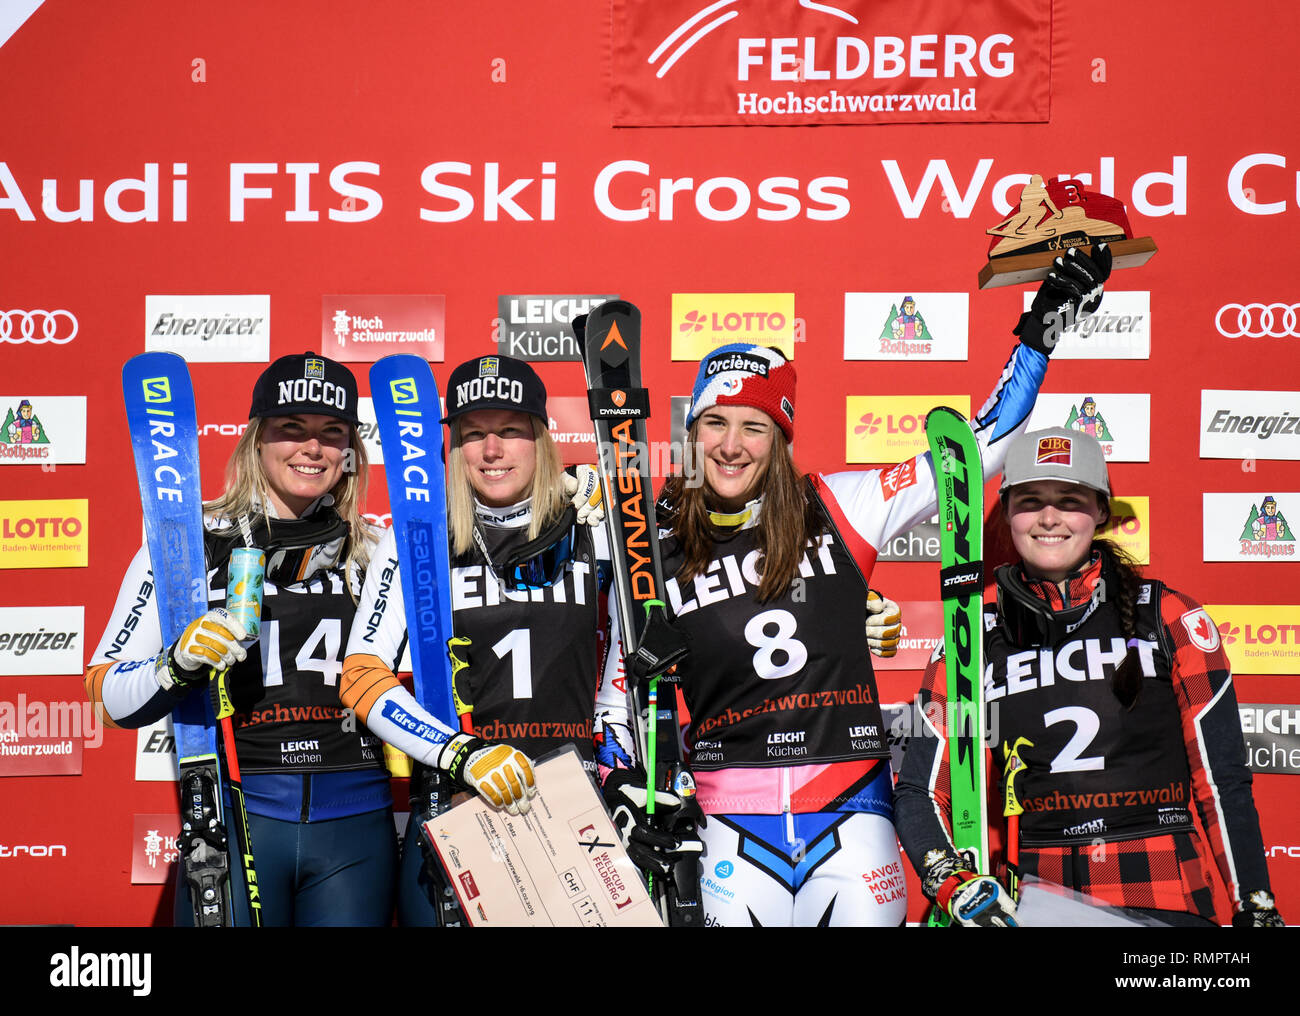 Feldberg, Germany. 16th Feb, 2019. Ski Cross: World Cup. Second placed Lisa Andersson (l-r) from Sweden, winner Sandra Naeslund from Sweden, third placed Alizee Baron from France and fourth placed Marielle Thompson from Canada are on the podium at the award ceremony. Credit: Patrick Seeger/dpa/Alamy Live News Stock Photo